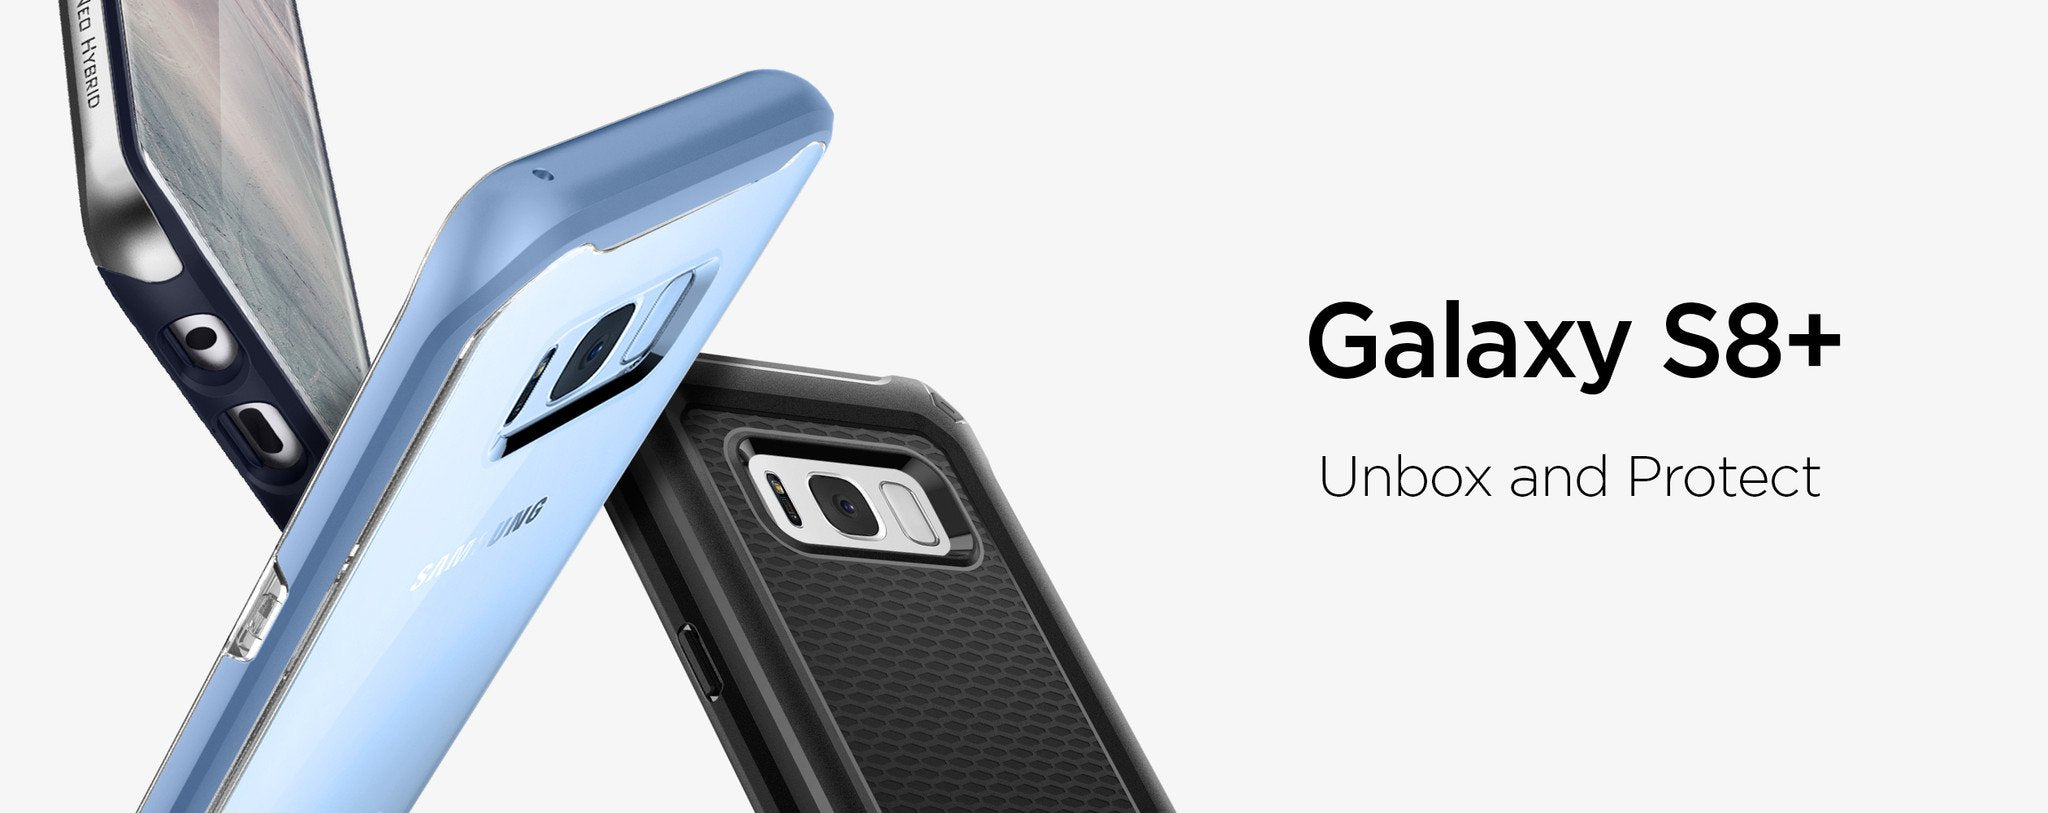 s8 Plus cases covers and accessories in pakistan